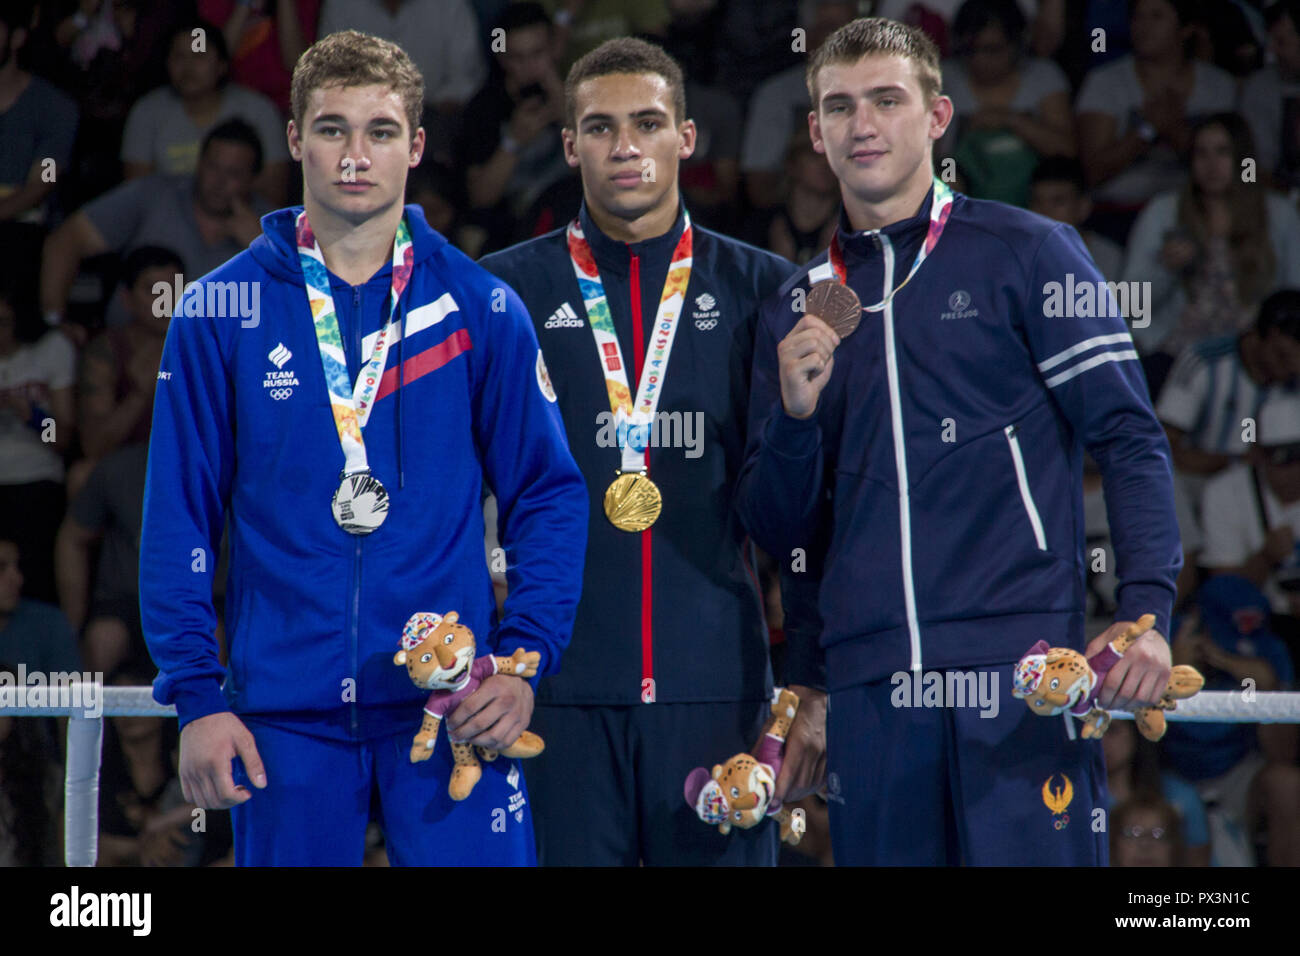 Buenos Aires, Buenos Aires, Argentina. 18th Oct, 2018. Prize of the semi-heavy weight of masculine boxing in the Olympic Games of the Youth, Buenos Aires 2018. The British boxer Itauma Karol was the winner of the gold medal, while the silver medal was won by the boxer Kolesnikov Ruslan of Russia and the Bronze medal Merjanov Timur of Uzbekistan. Credit: Roberto Almeida Aveledo/ZUMA Wire/Alamy Live News Stock Photo